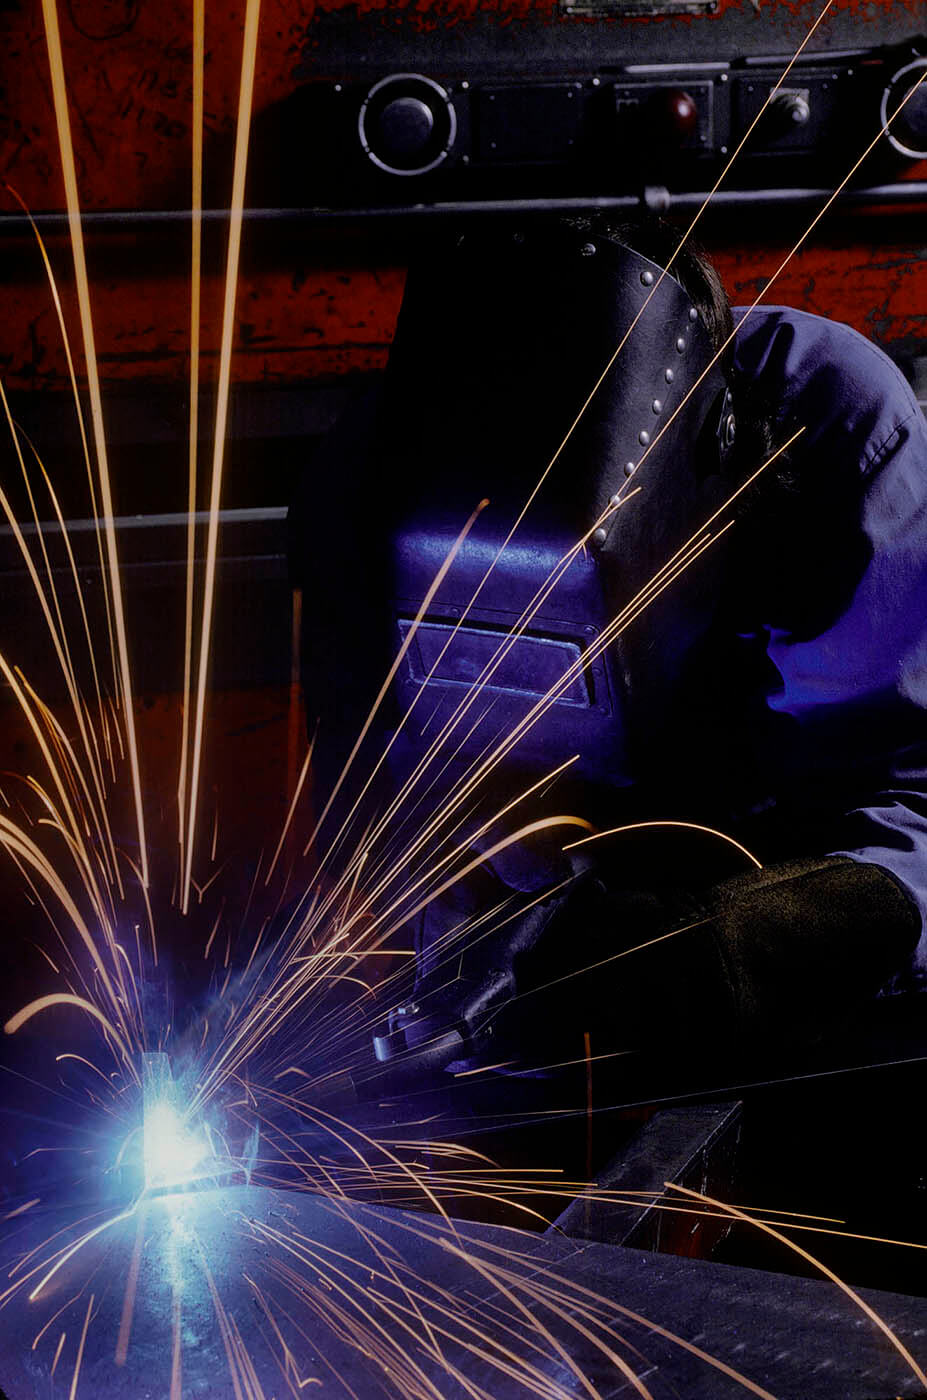 Photograph of a welder at work.  Commercial lifestyle photography by Craig Lovell